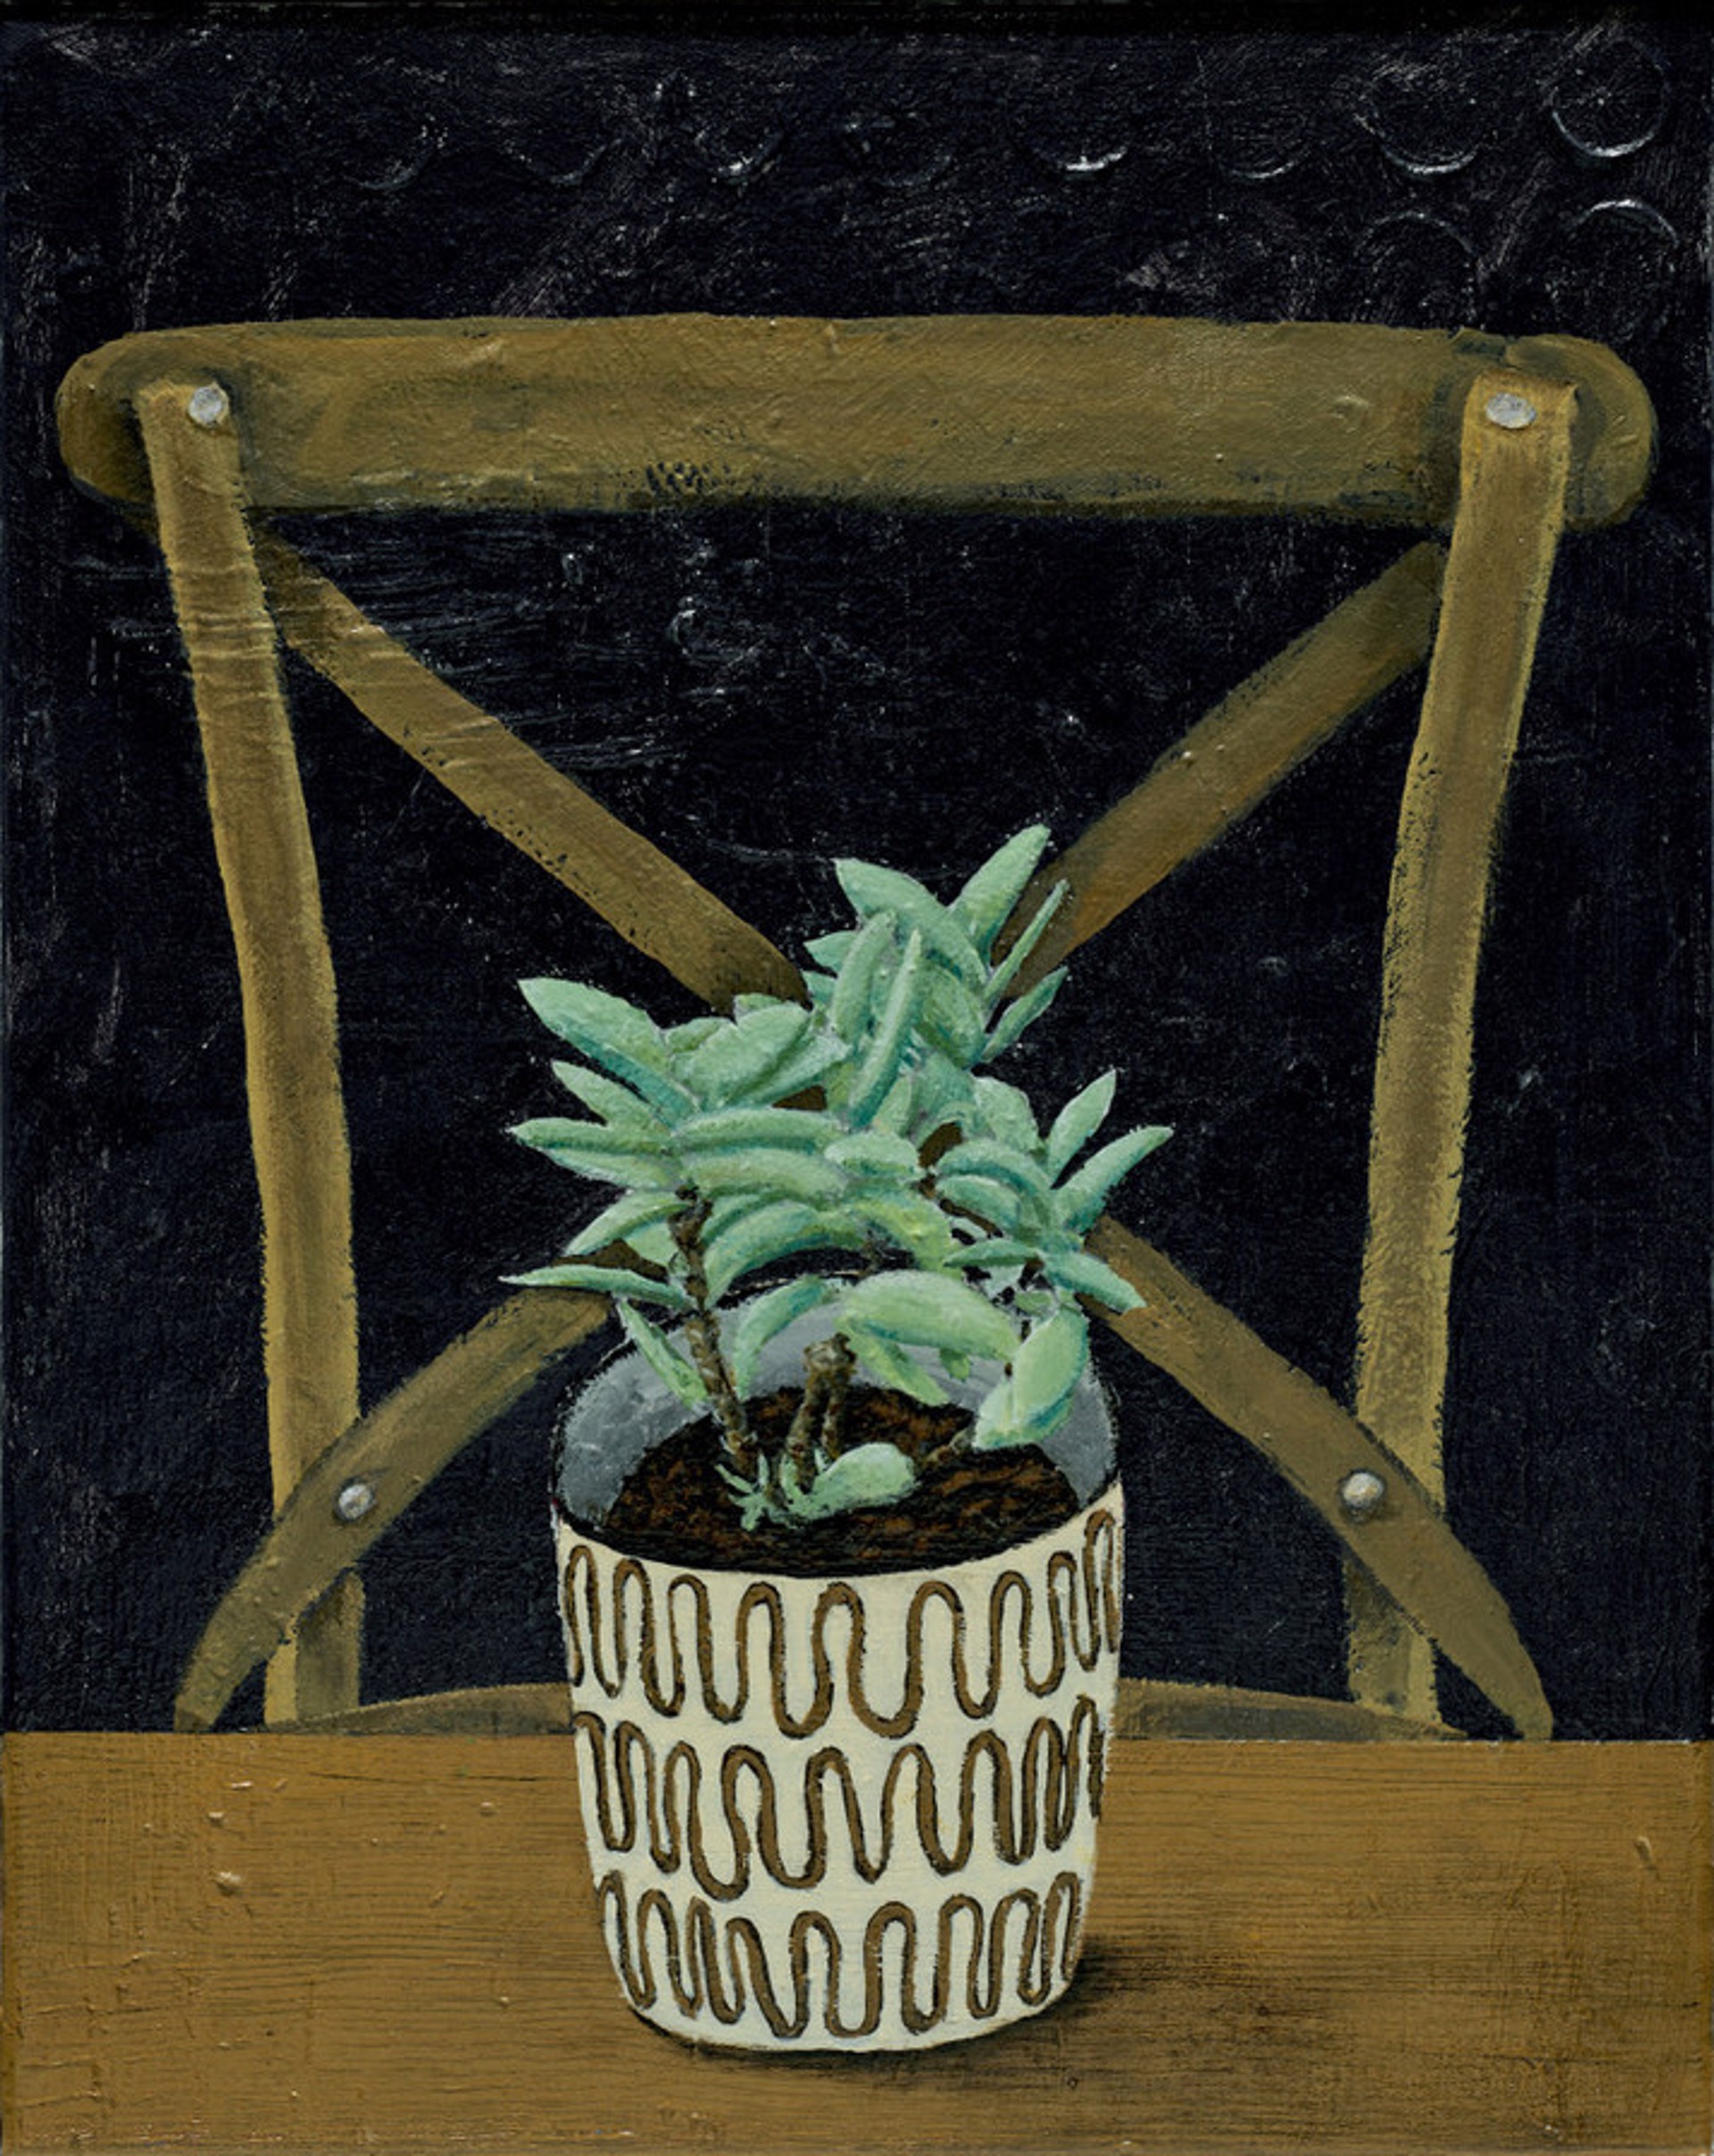 "Bentwood Chair" by Gabe Langholtz